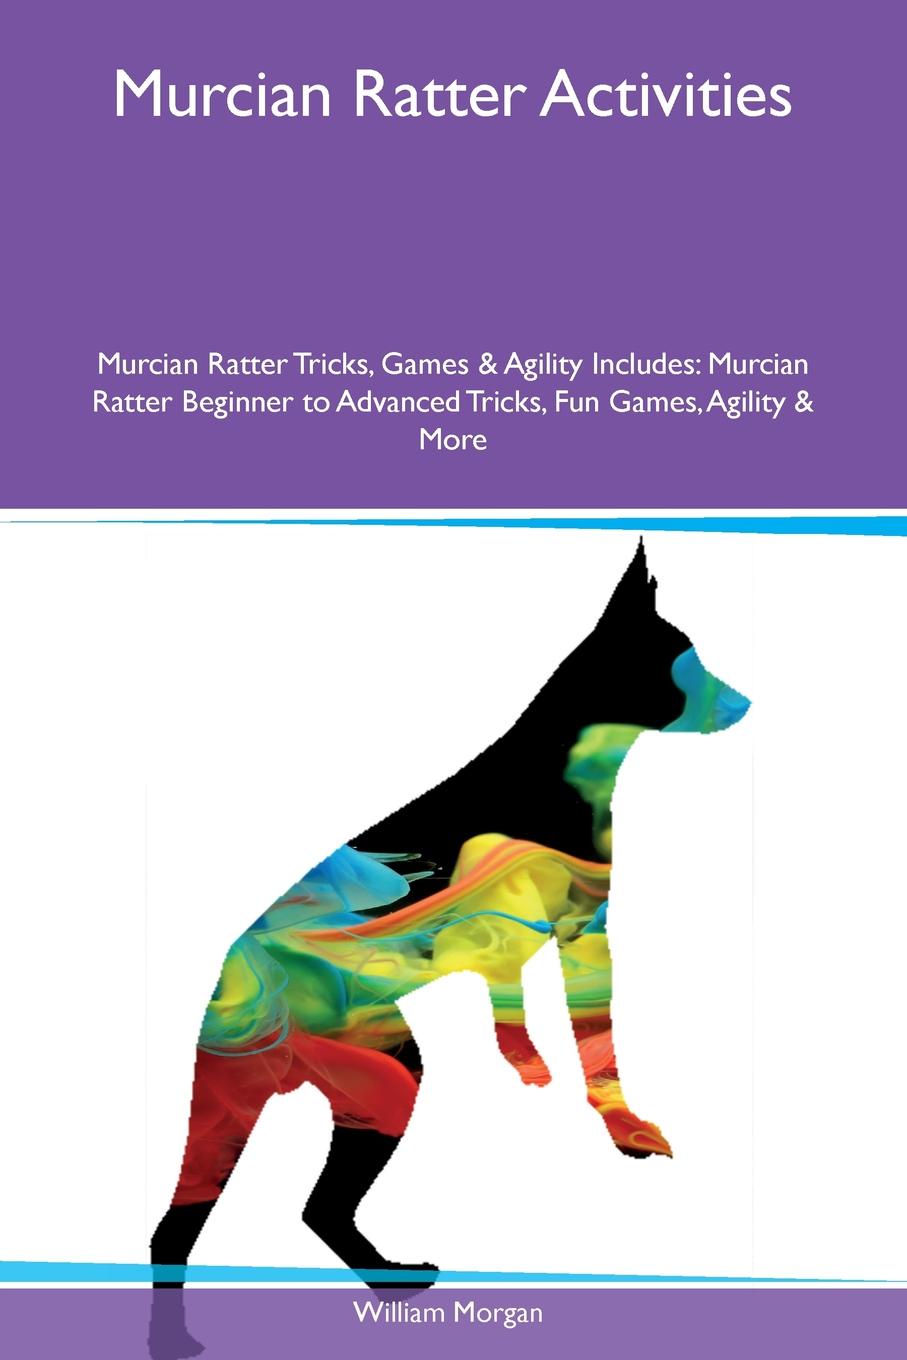 Murcian Ratter Activities Murcian Ratter Tricks, Games & Agility Includes. Murcian Ratter Beginner to Advanced Tricks, Fun Games, Agility & More